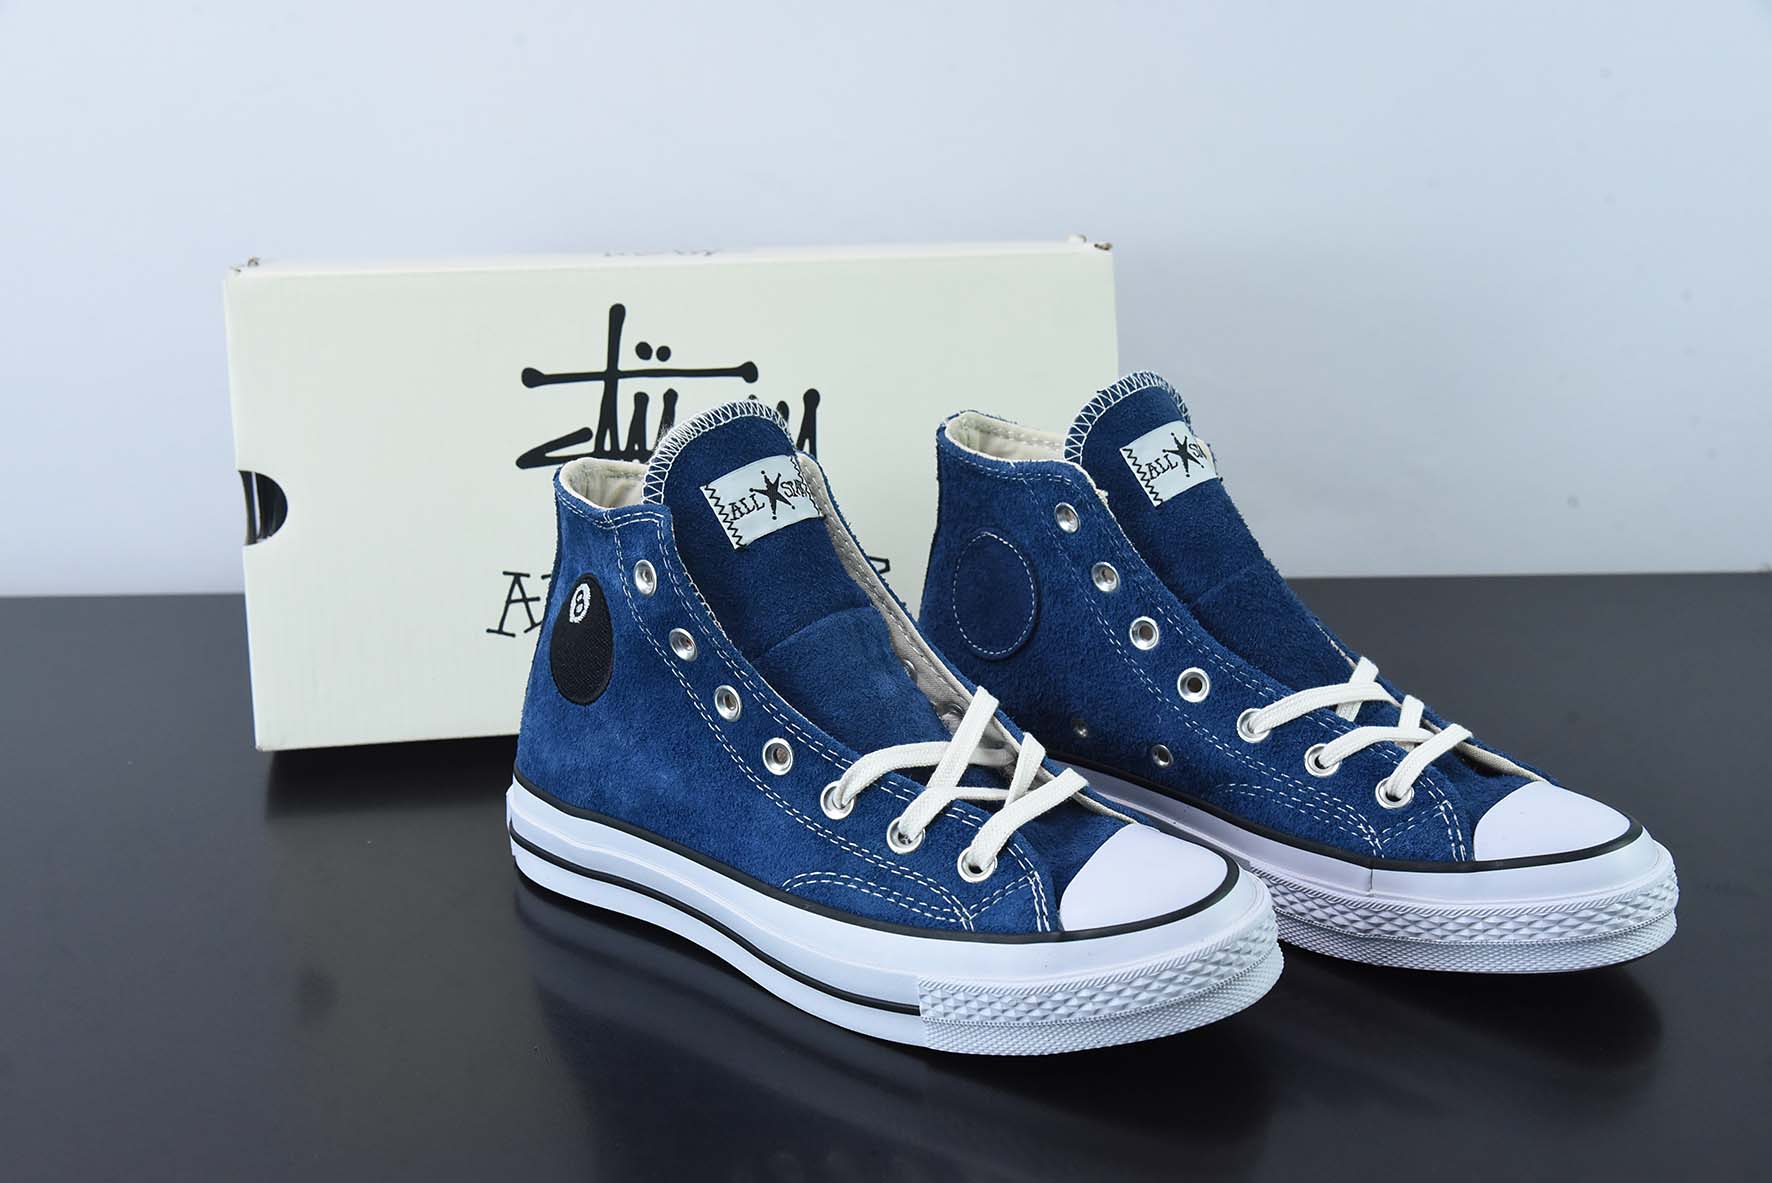 Converse Chuck Taylor Customs - Ball” Sargasso Sea/White/Black A03711C For  Sale – RcjShops - Stussy x Shes also worn sneakers from Snyder Converse and  Adidas “8